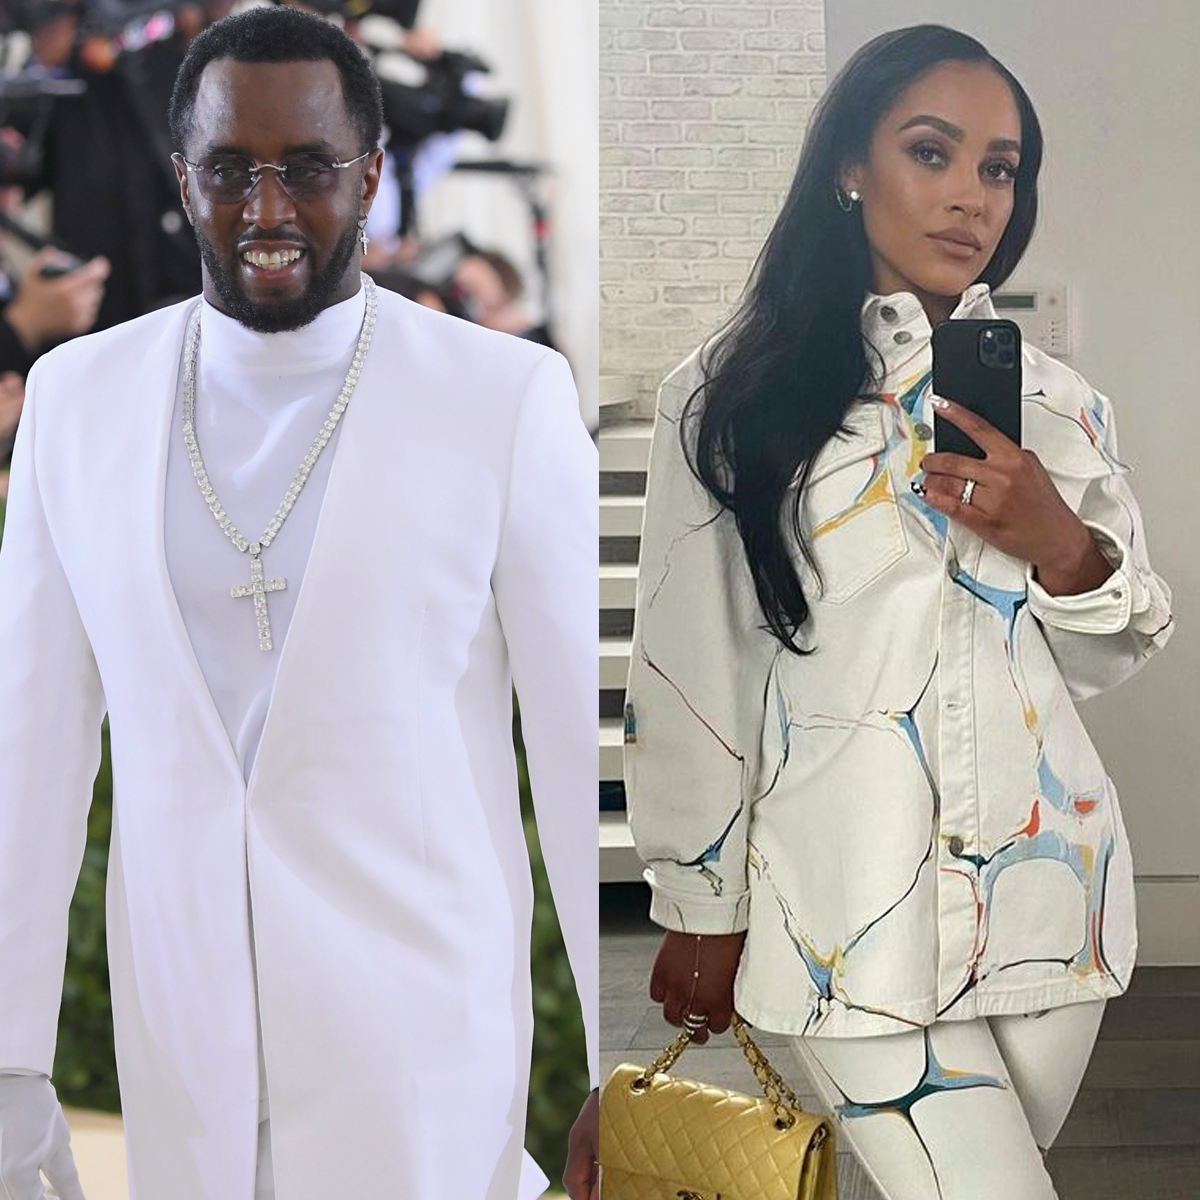 https://akns-images.eonline.com/eol_images/Entire_Site/202188/rs_1200x1200-210908154405-1200-sean-diddy-combs-joie-chavis.jpg?fit=around%7C1080:1080&output-quality=90&crop=1080:1080;center,top